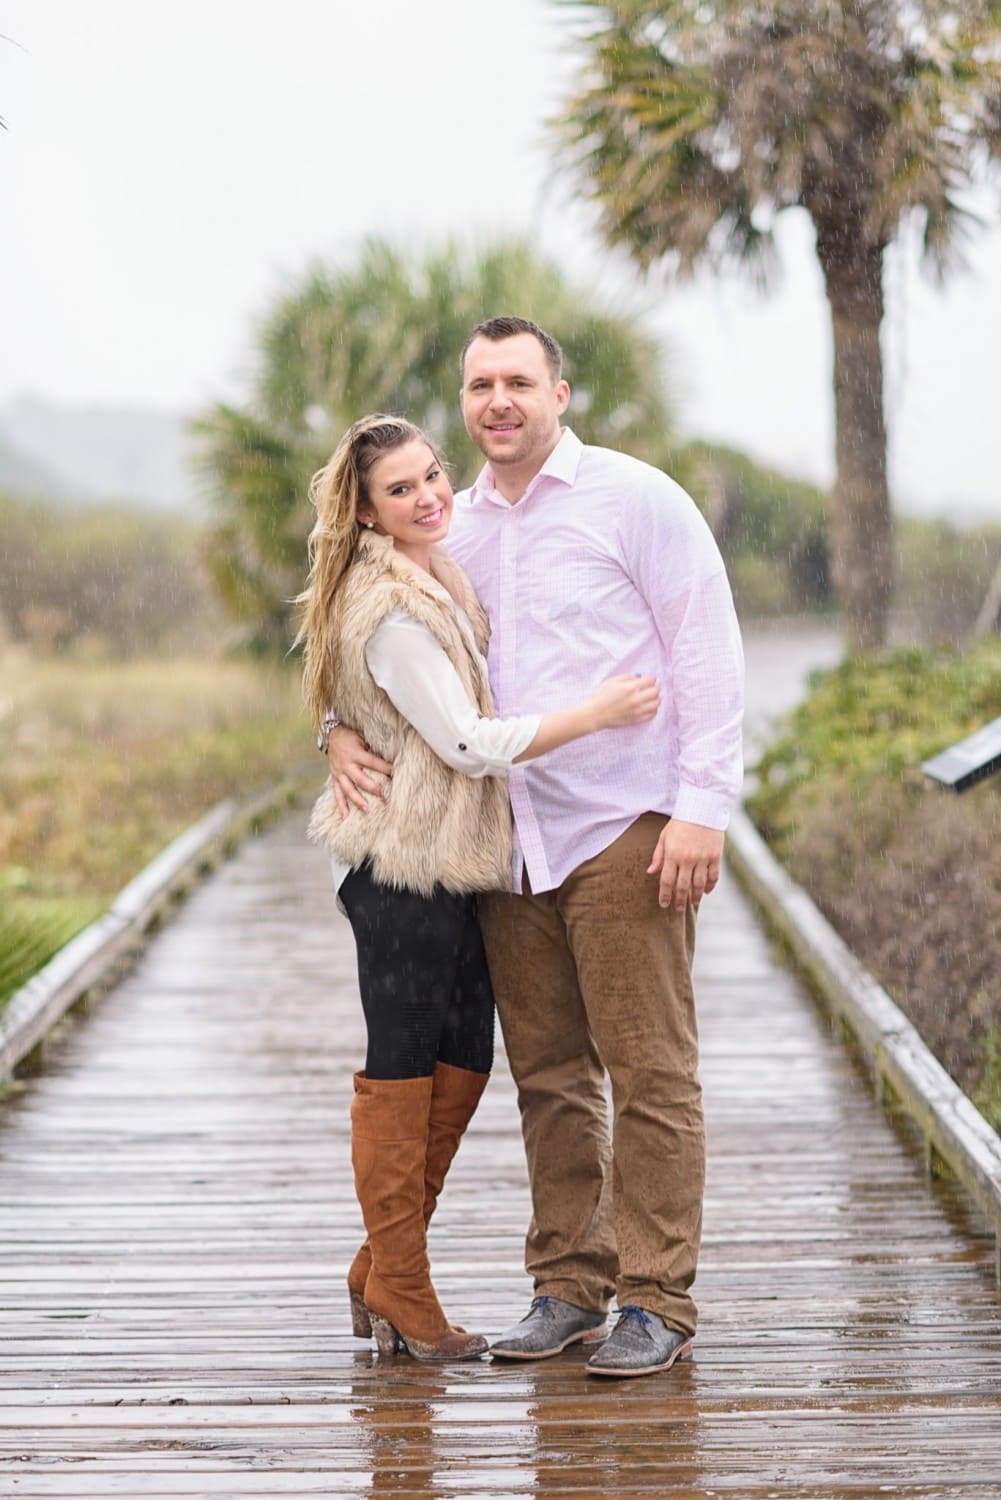 Pouring rain during engagement pictures -